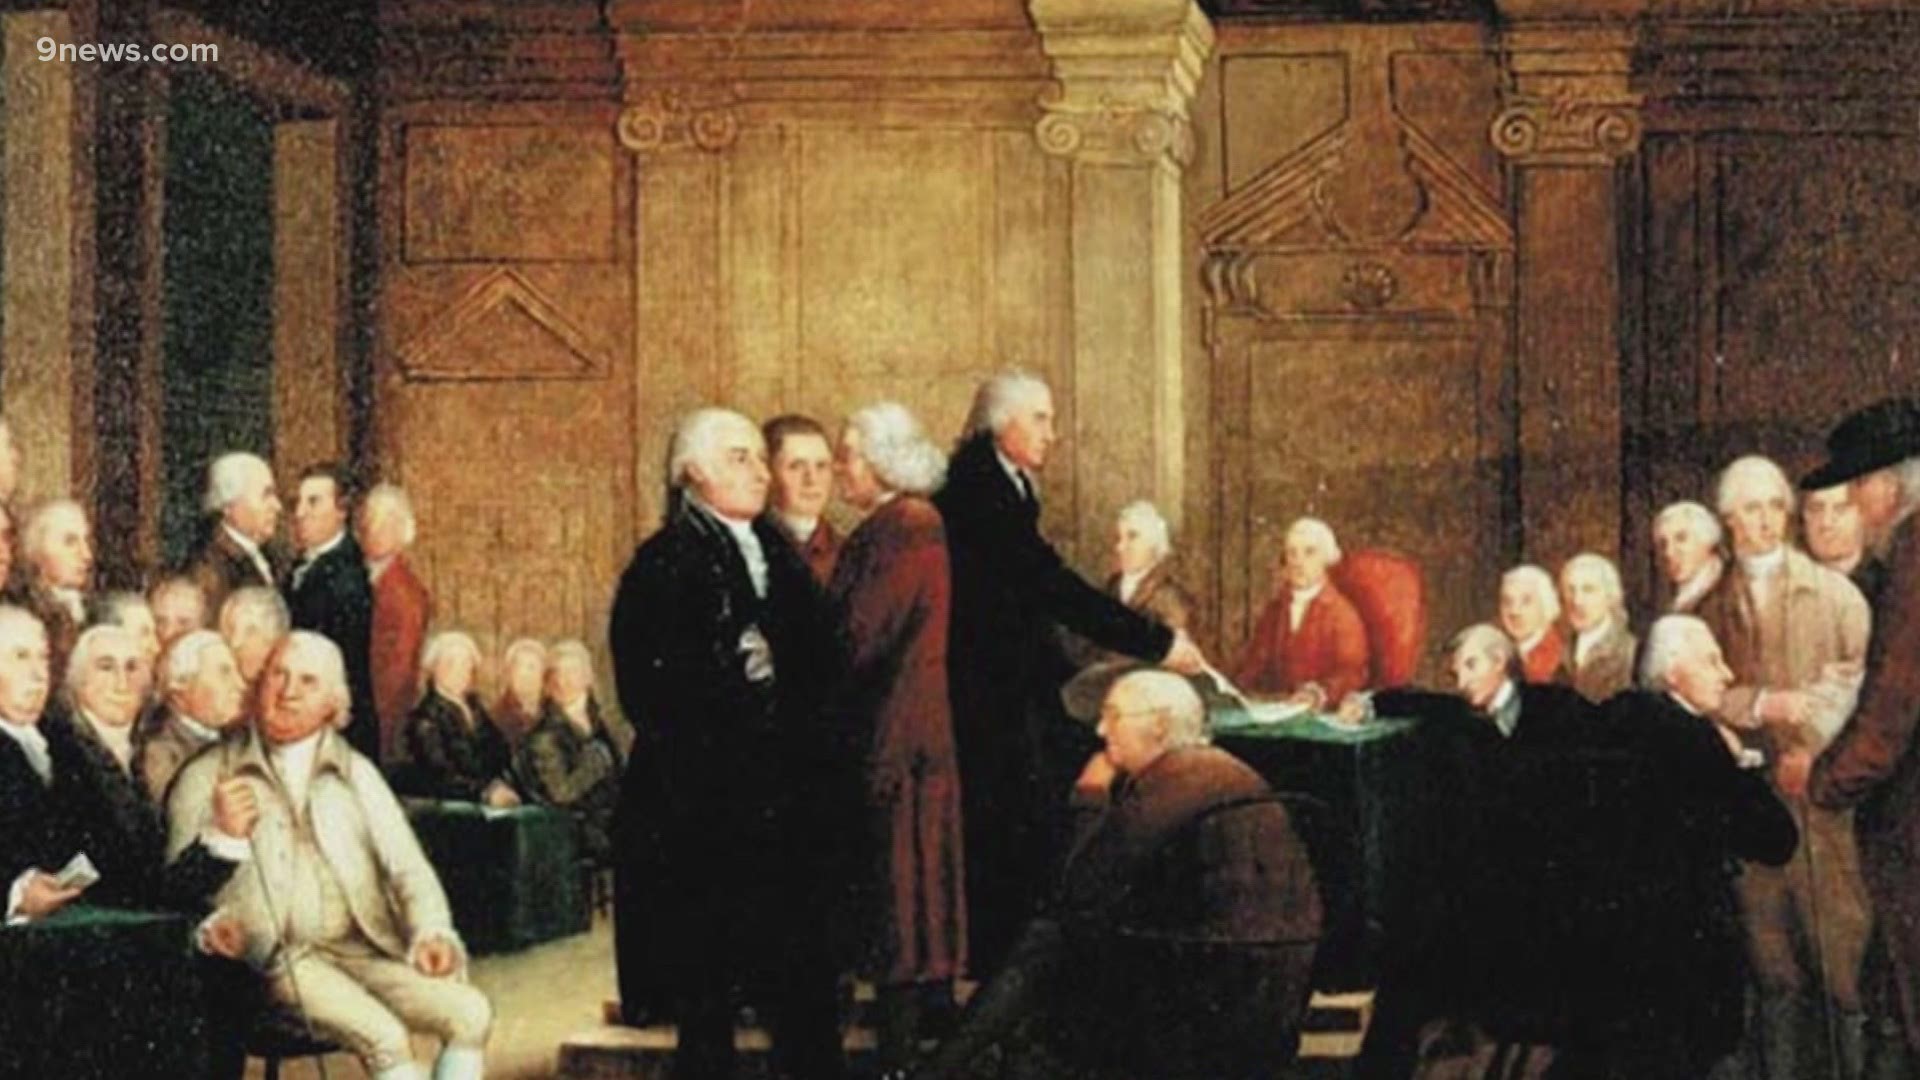 The Declaration of Independence was adopted by Congress on July 4, 1776, but delegates didn't start signing it until Aug. 2.